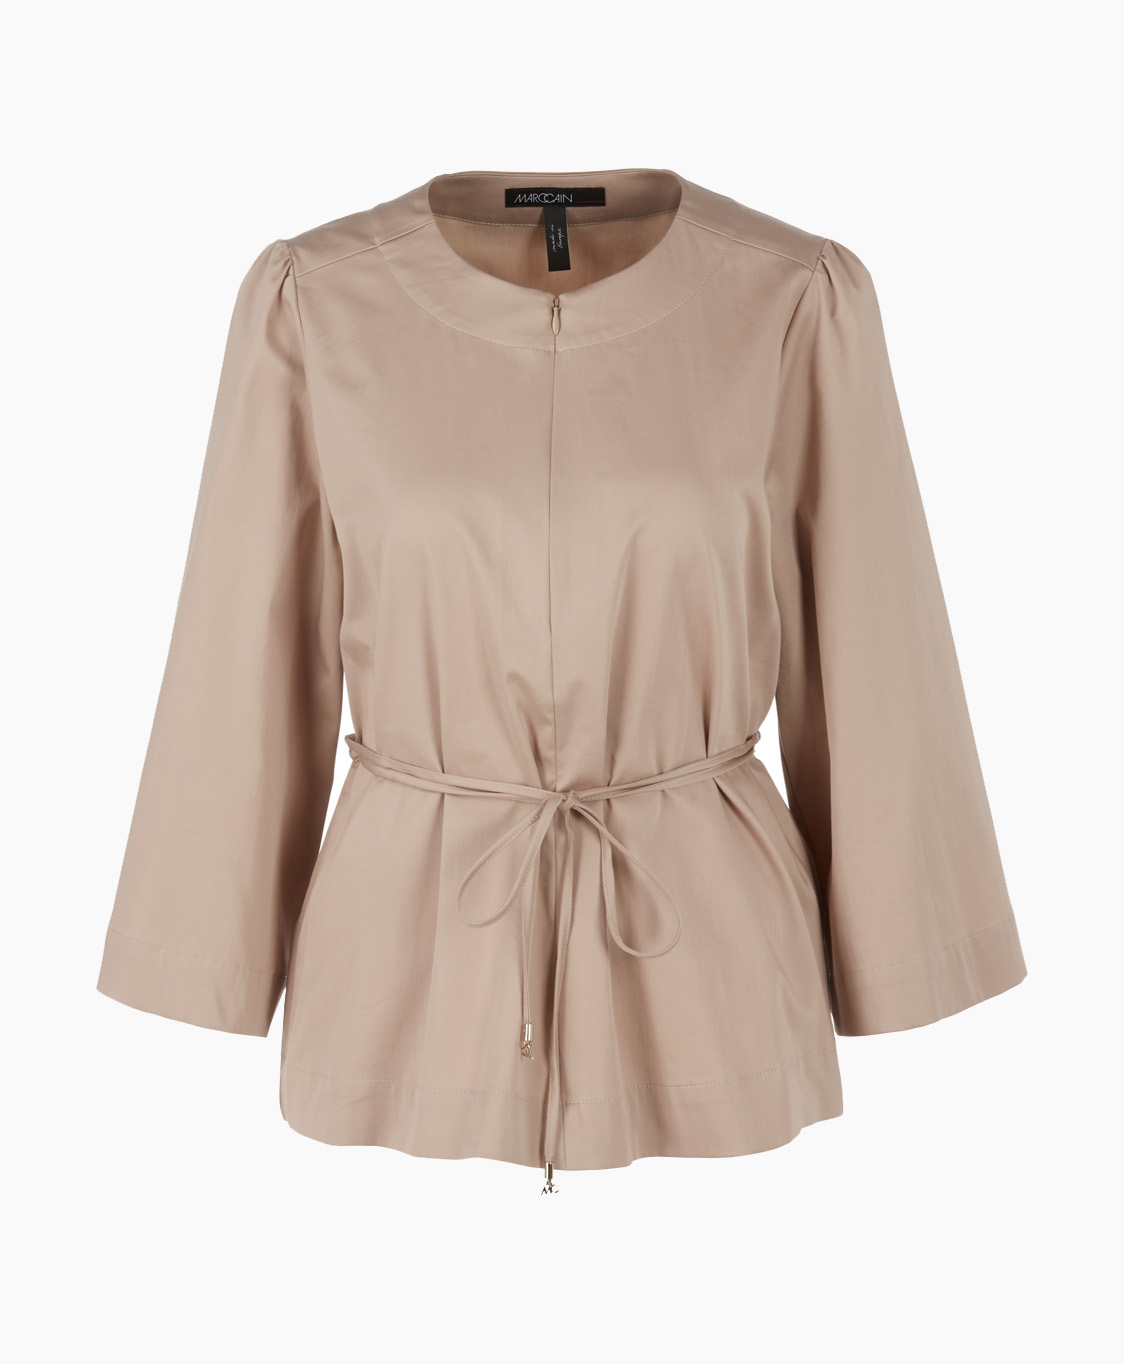 Marccain Collectie Blouse Uc 51.23 W90 Beige